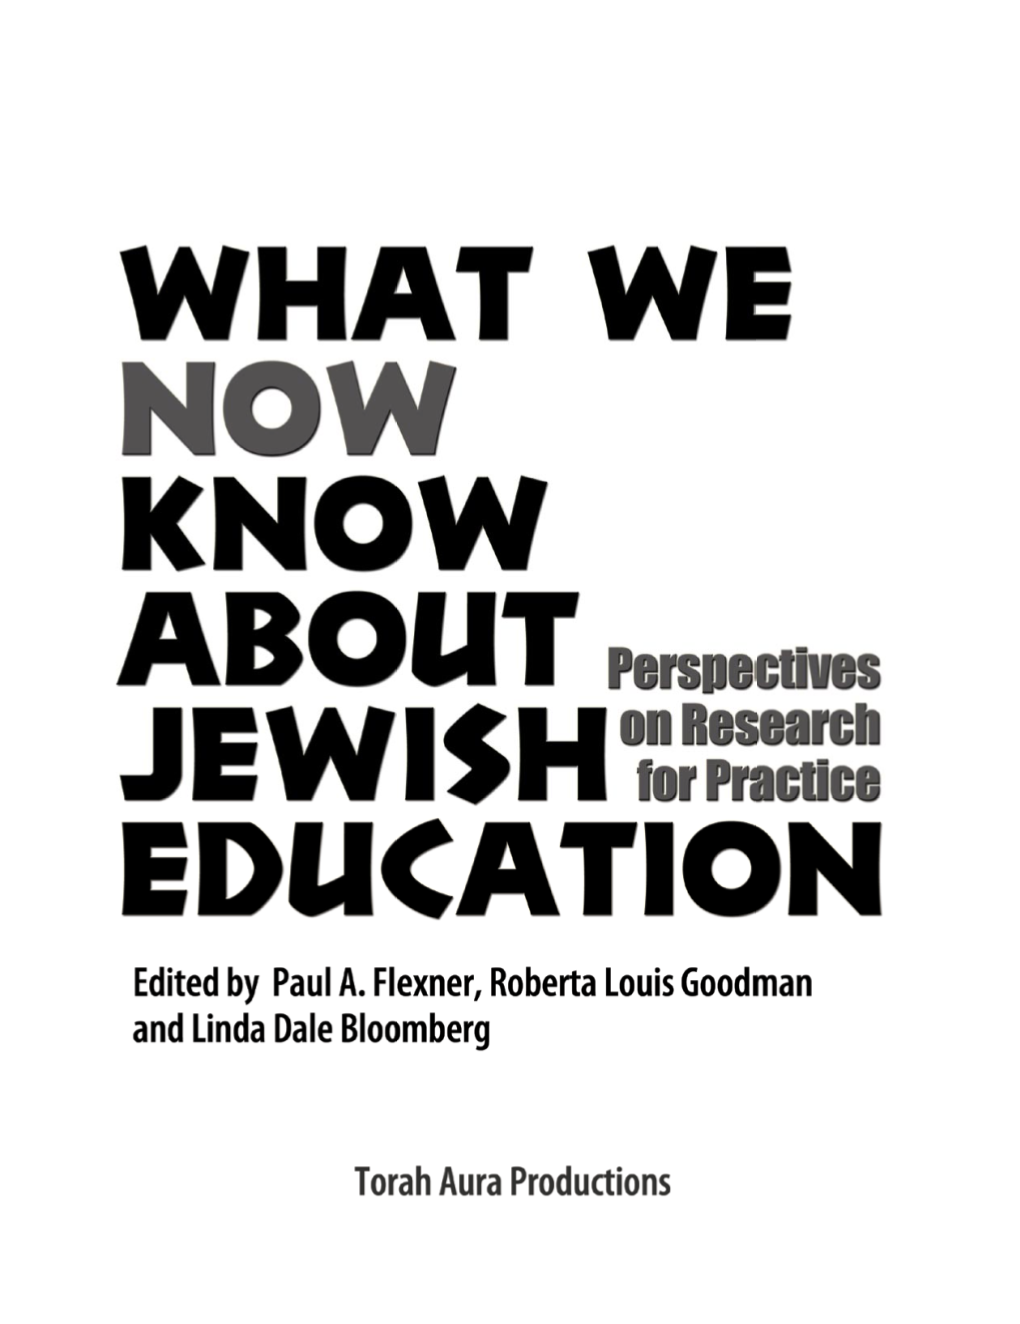 What We Now Know About Jewish Education Foreword